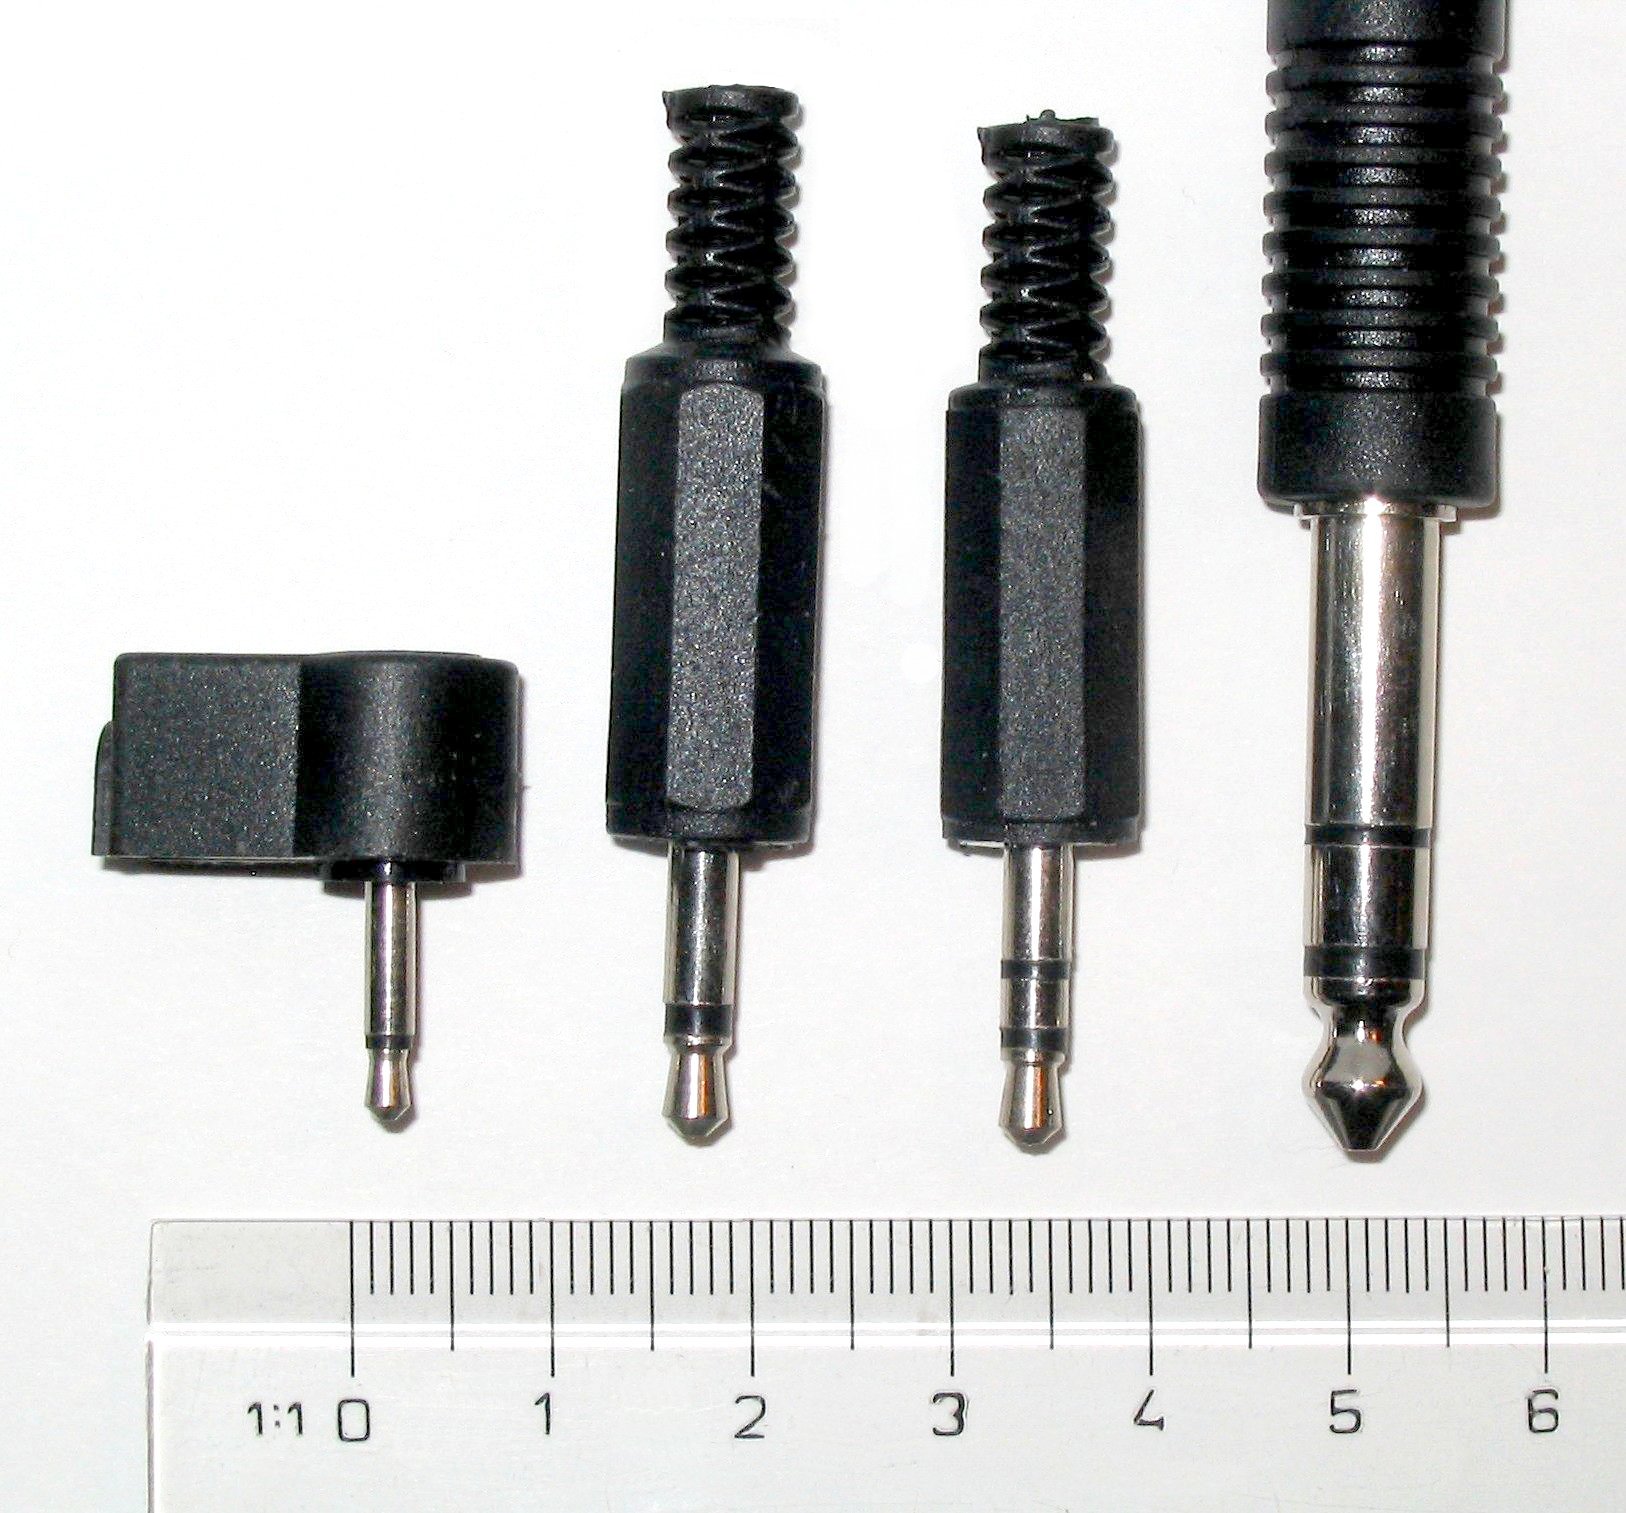 A picture of a ¼ inch versus a ⅛ inch cable